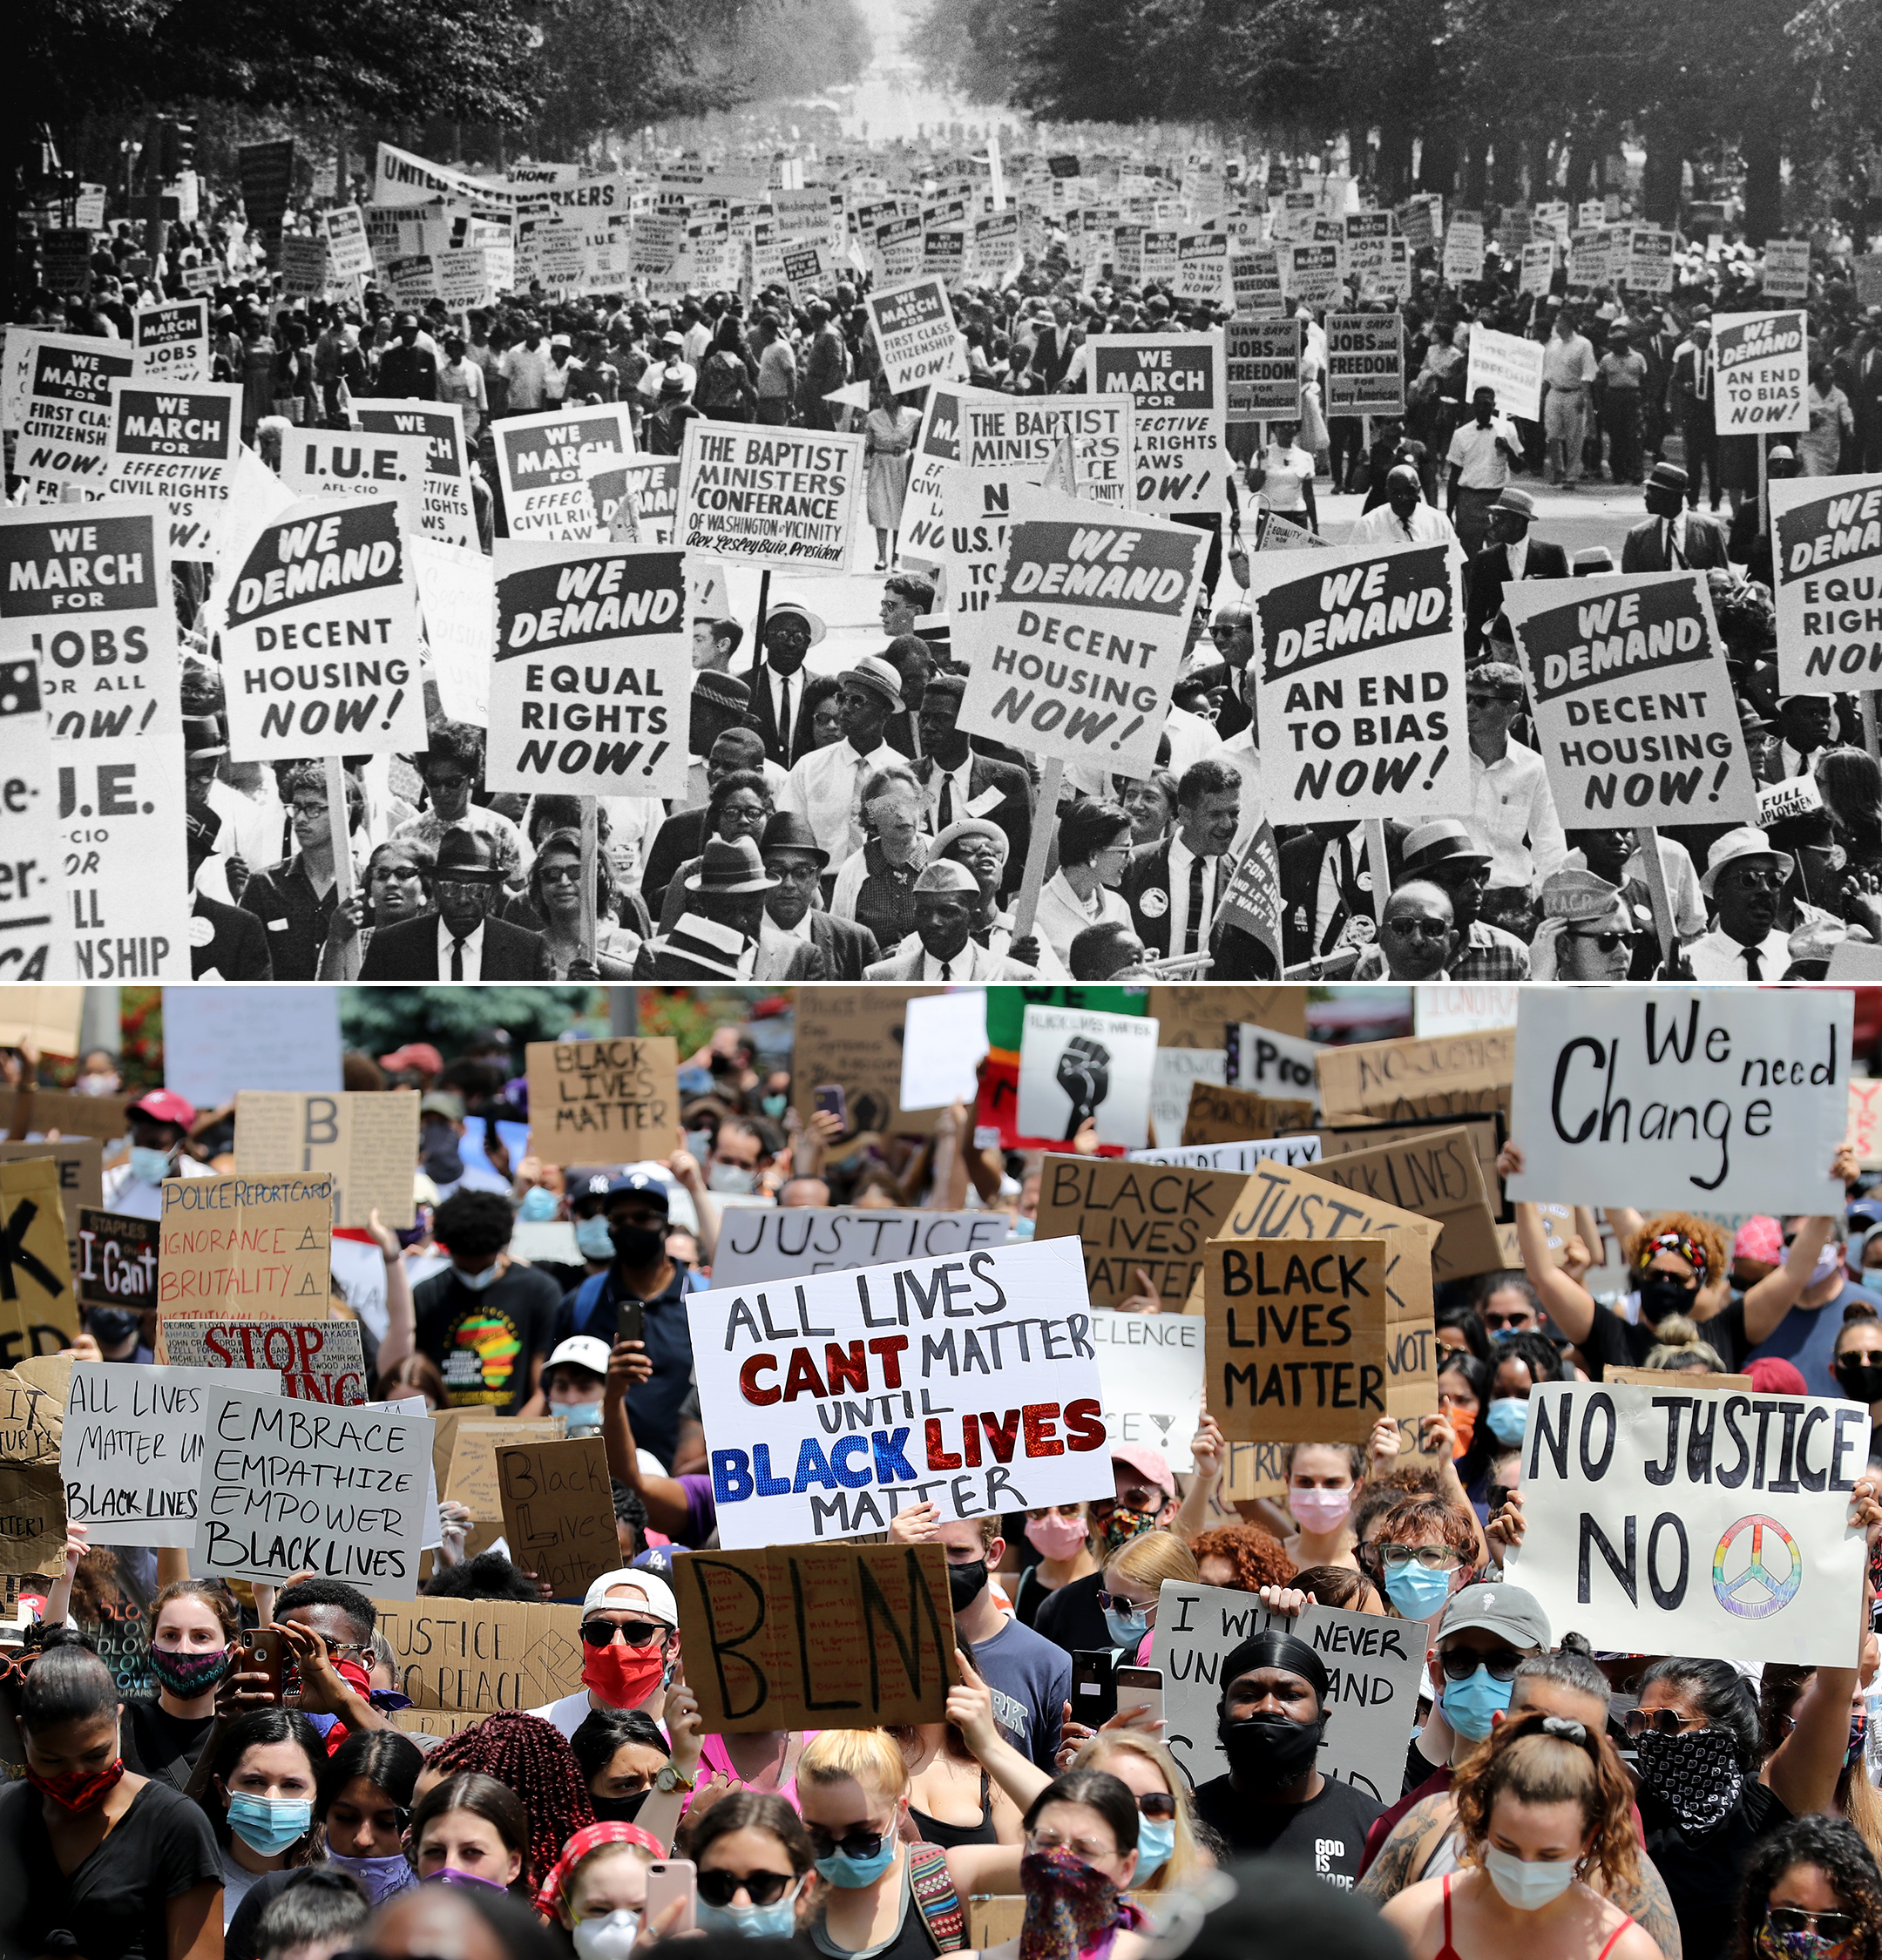 two images stacked, the top in black and white of demonstratorsin 1963 holding signs and the bottom in color of demonstrators in 2020 protesting racial injustice